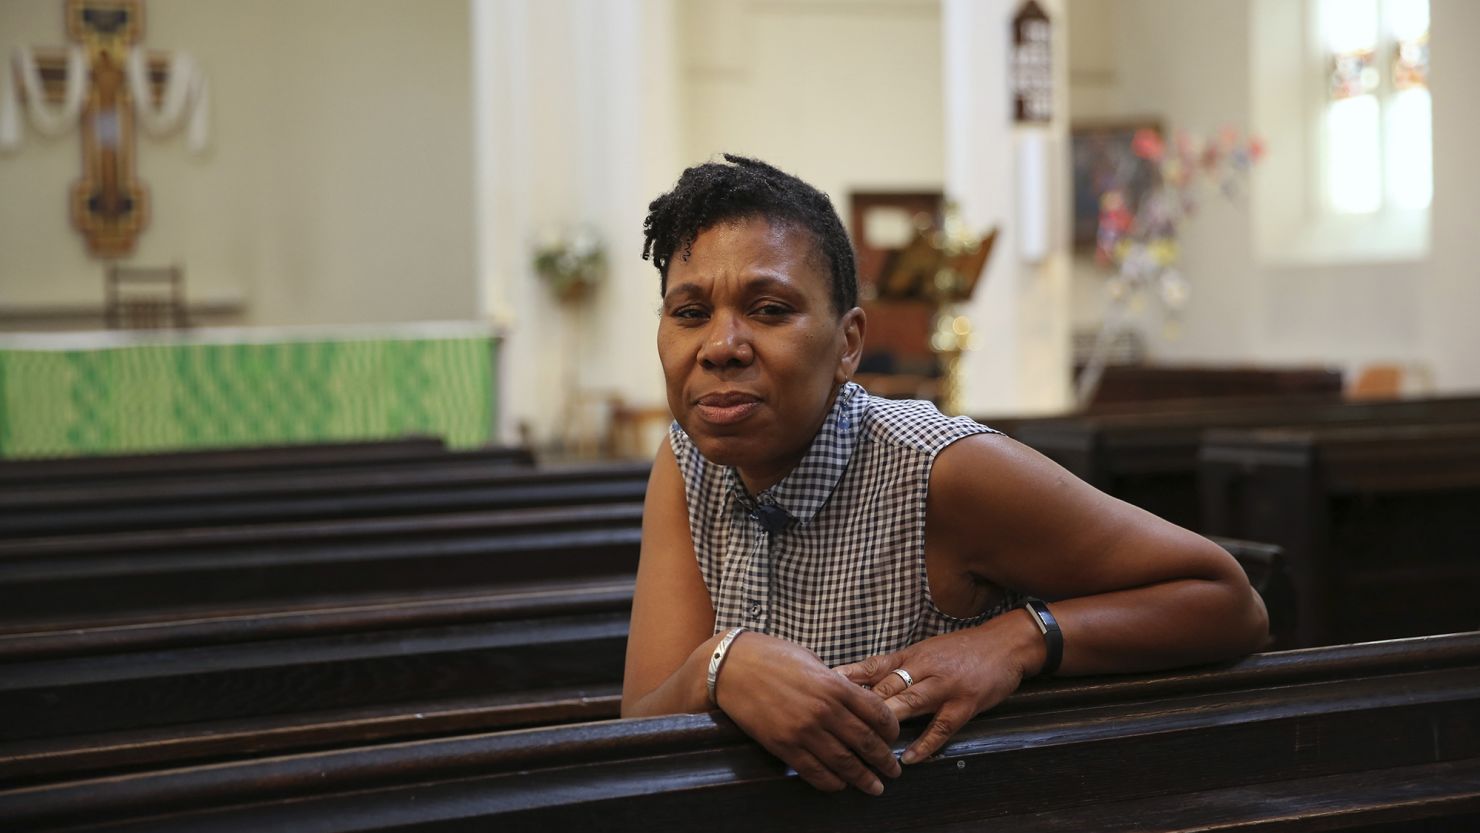 Rosemarie Mallett pictured in 2016 as vicar of a church in London's Brixton district. She is now Bishop of Croydon, overseeing several suburbs on the outskirts of the UK capital.